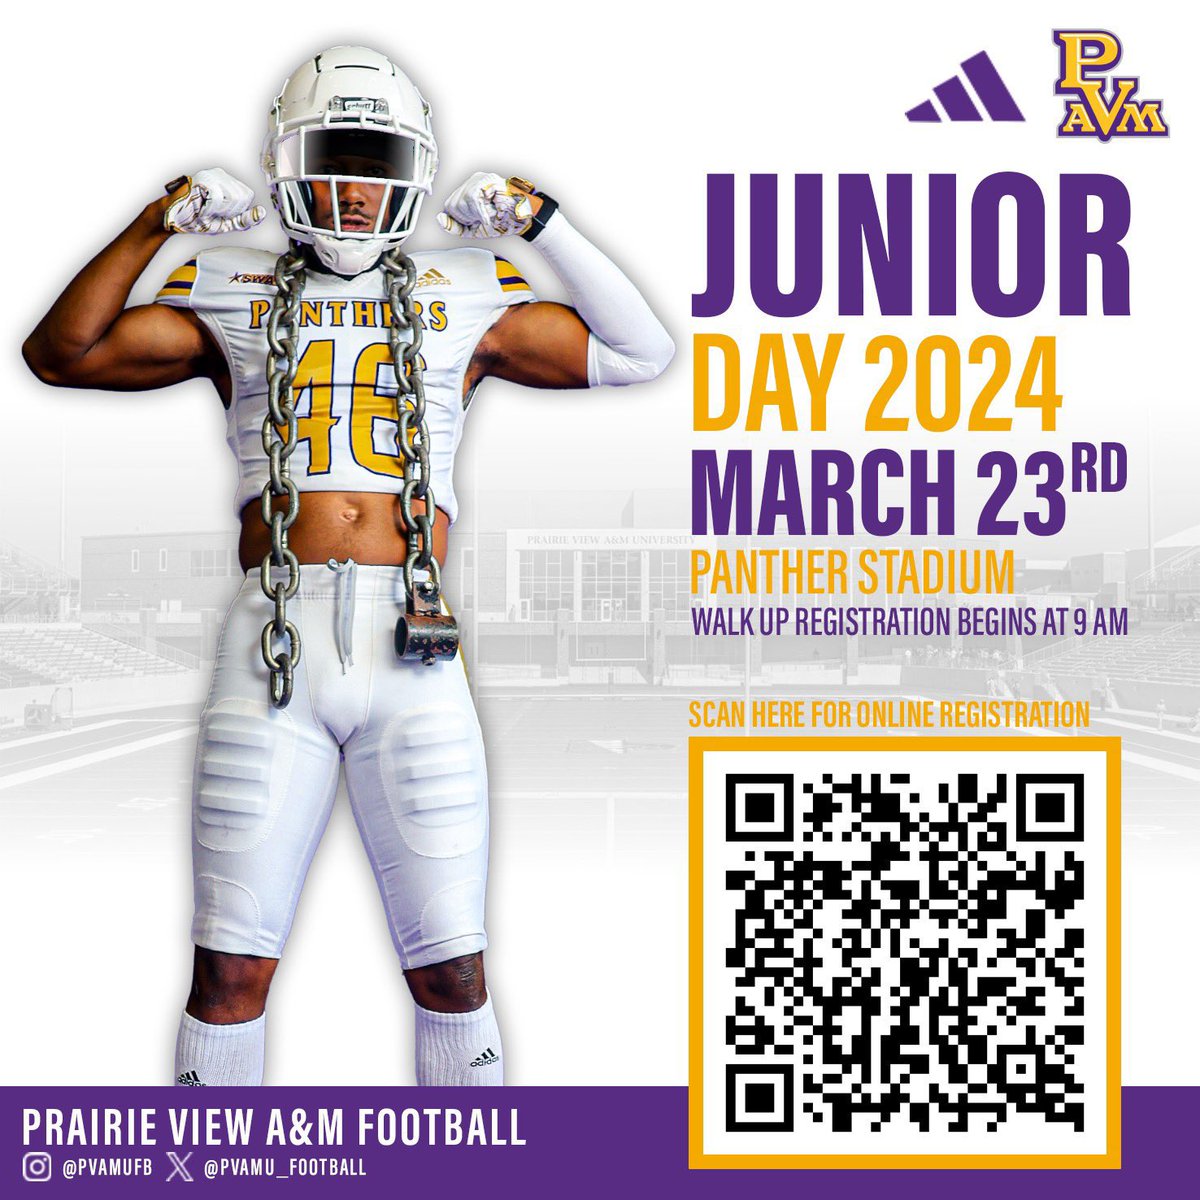 🚨Junior Day is Coming Up Register via the Link: questionnaires.armssoftware.com/1f0d7b9feb6b 🗓️Saturday, March 23rd, 2024 📍Panther Stadium ⏰9AM (Walk Up Sign-In) #PVAMUFootball | #PvNation